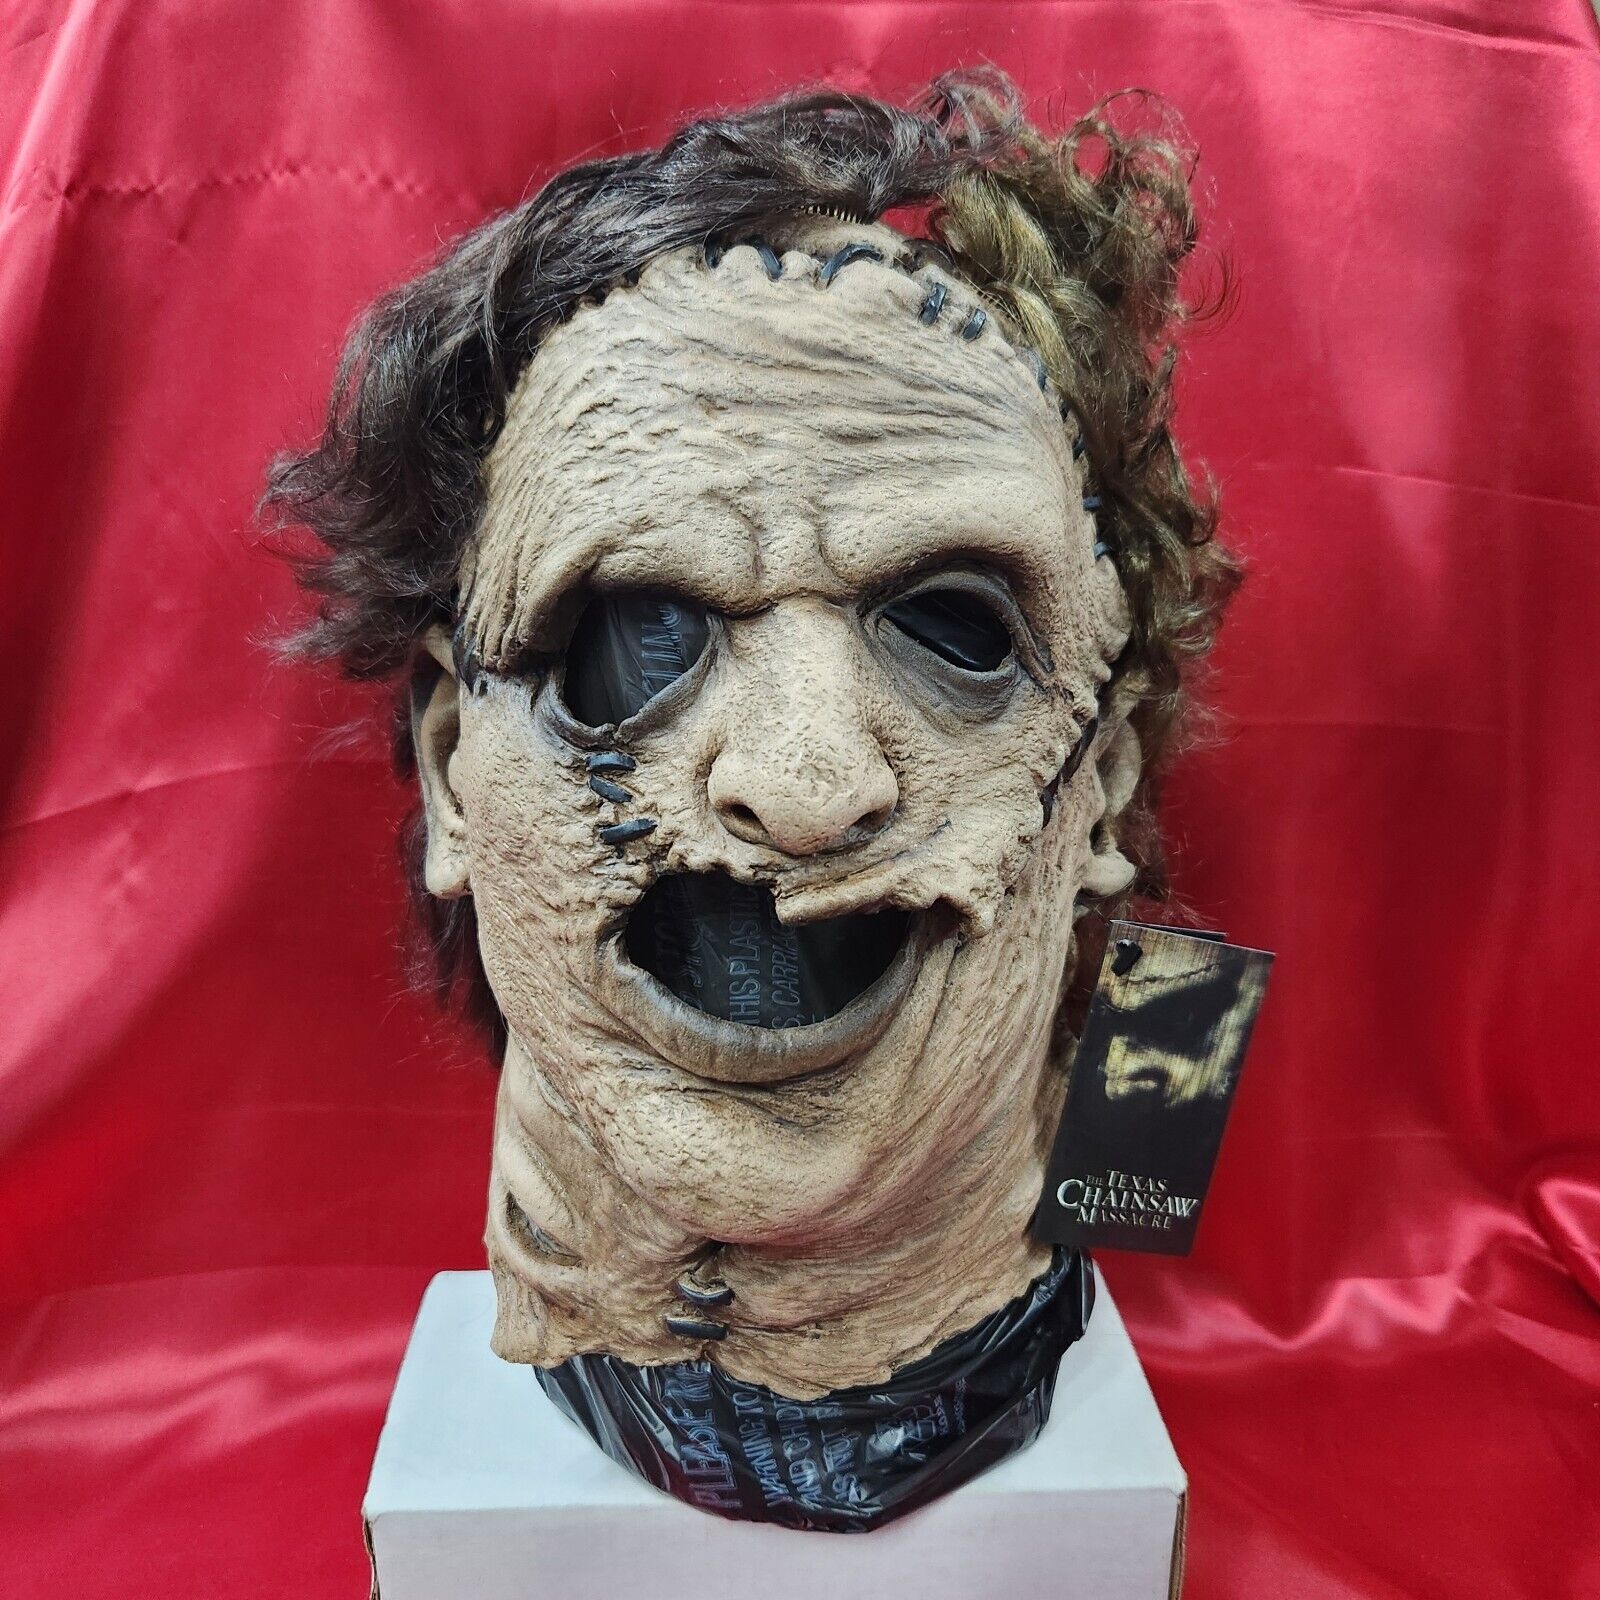 THE TEXAS CHAINSAW MASSACRE (2003) - LEATHERFACE MASK by Trick Or Treat Studios